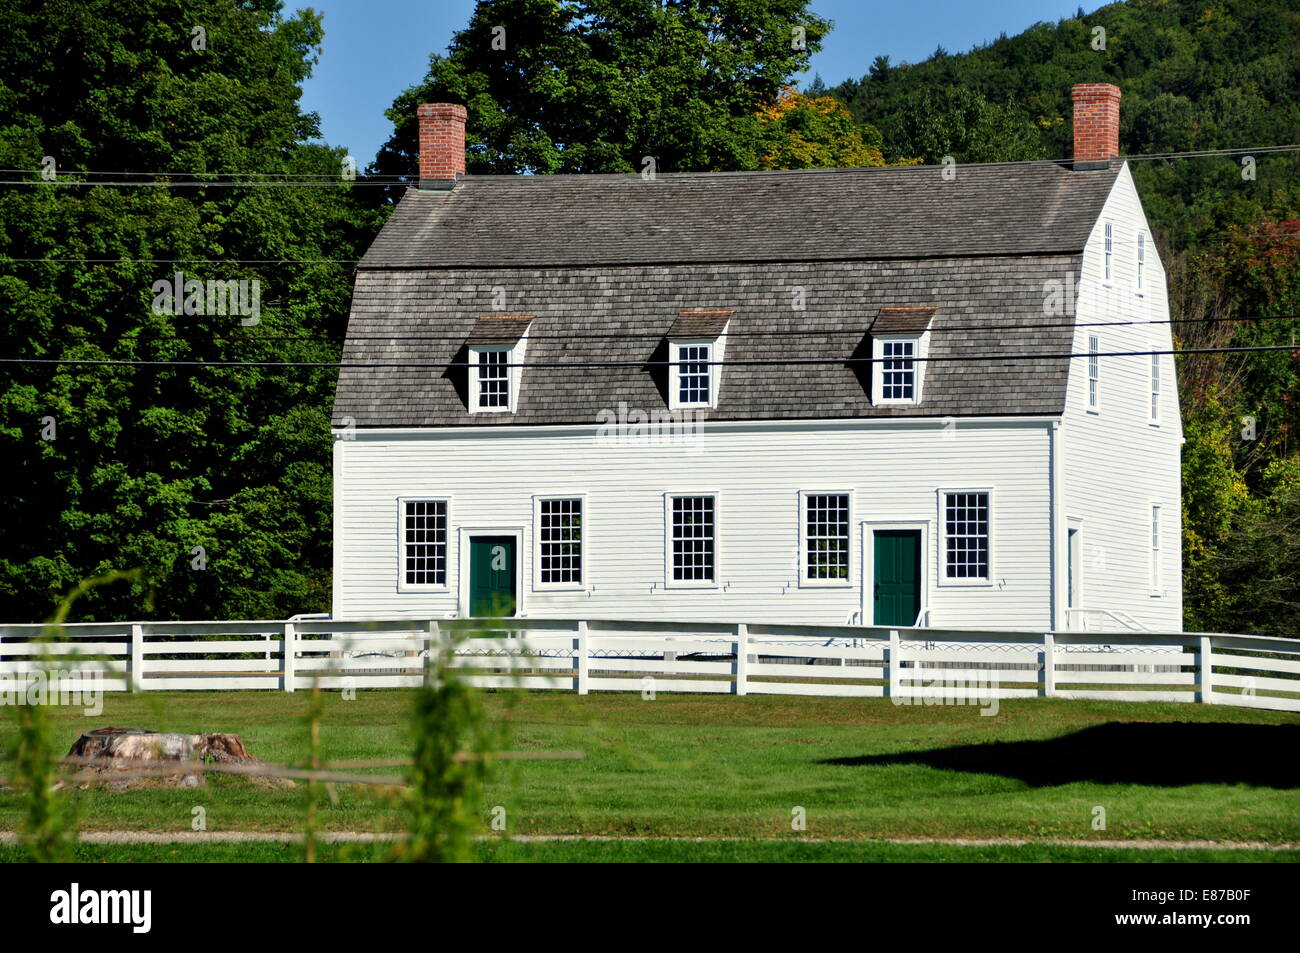 Hancock, Massachusetts:  18th century Meeting House with dormers and gambrel roof at the Hancock Shaker Village Stock Photo